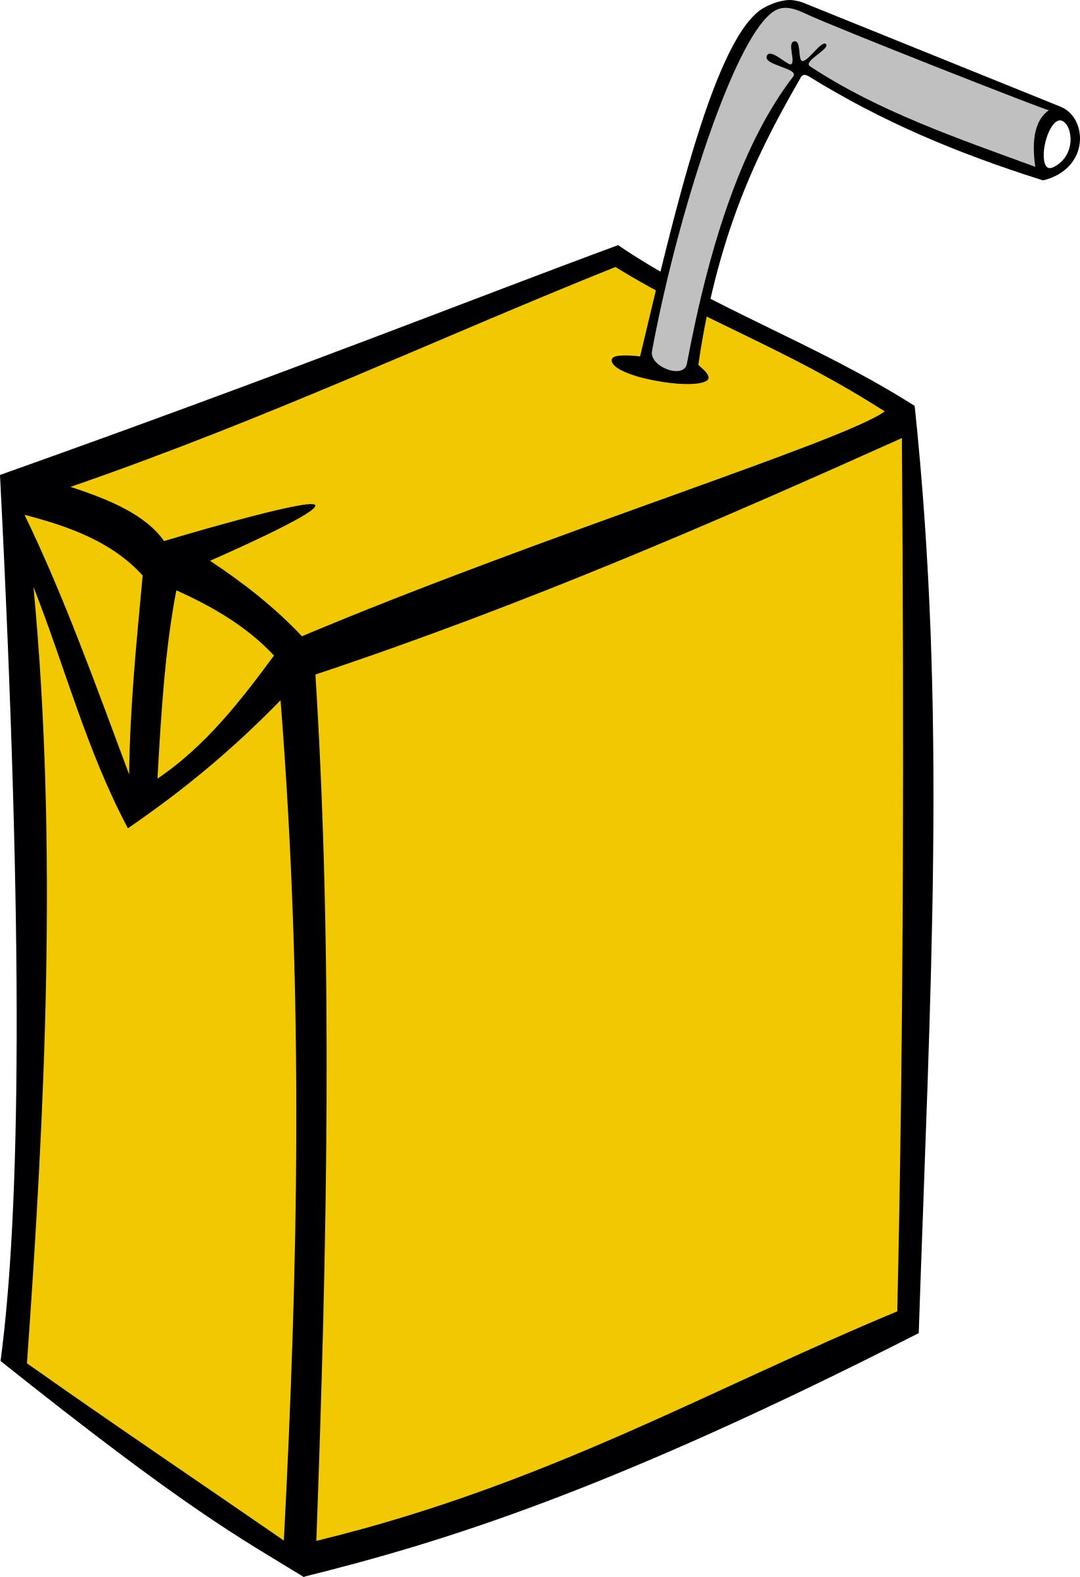 Juice Box with Straw png transparent